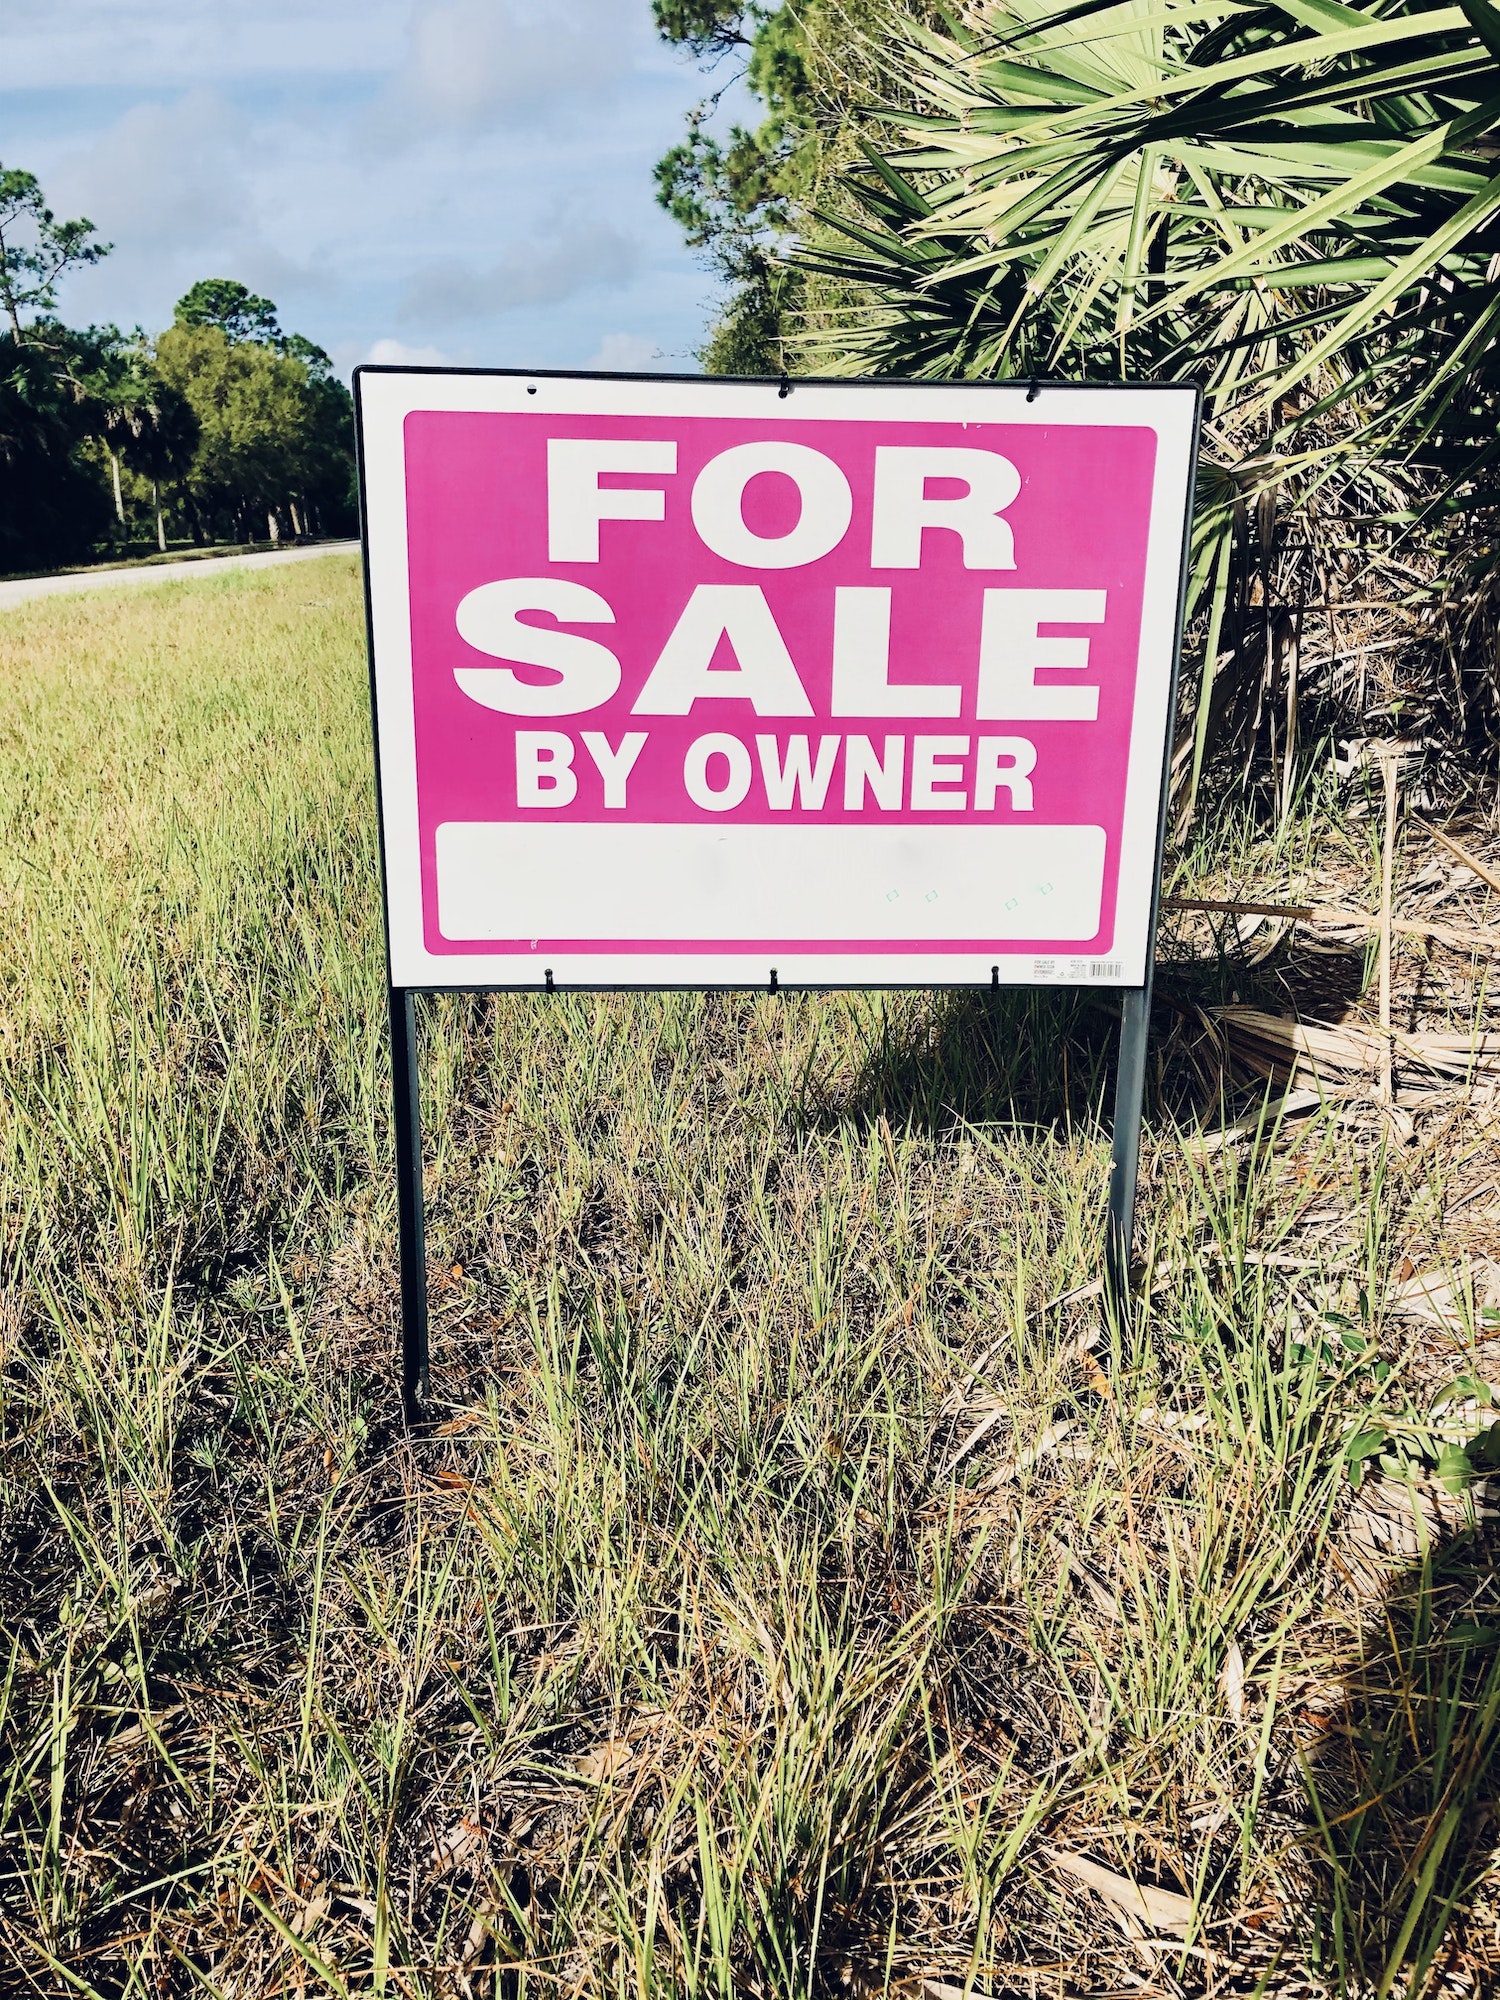 For sale by owner sign placed on a piece of property in hopes of selling their property.